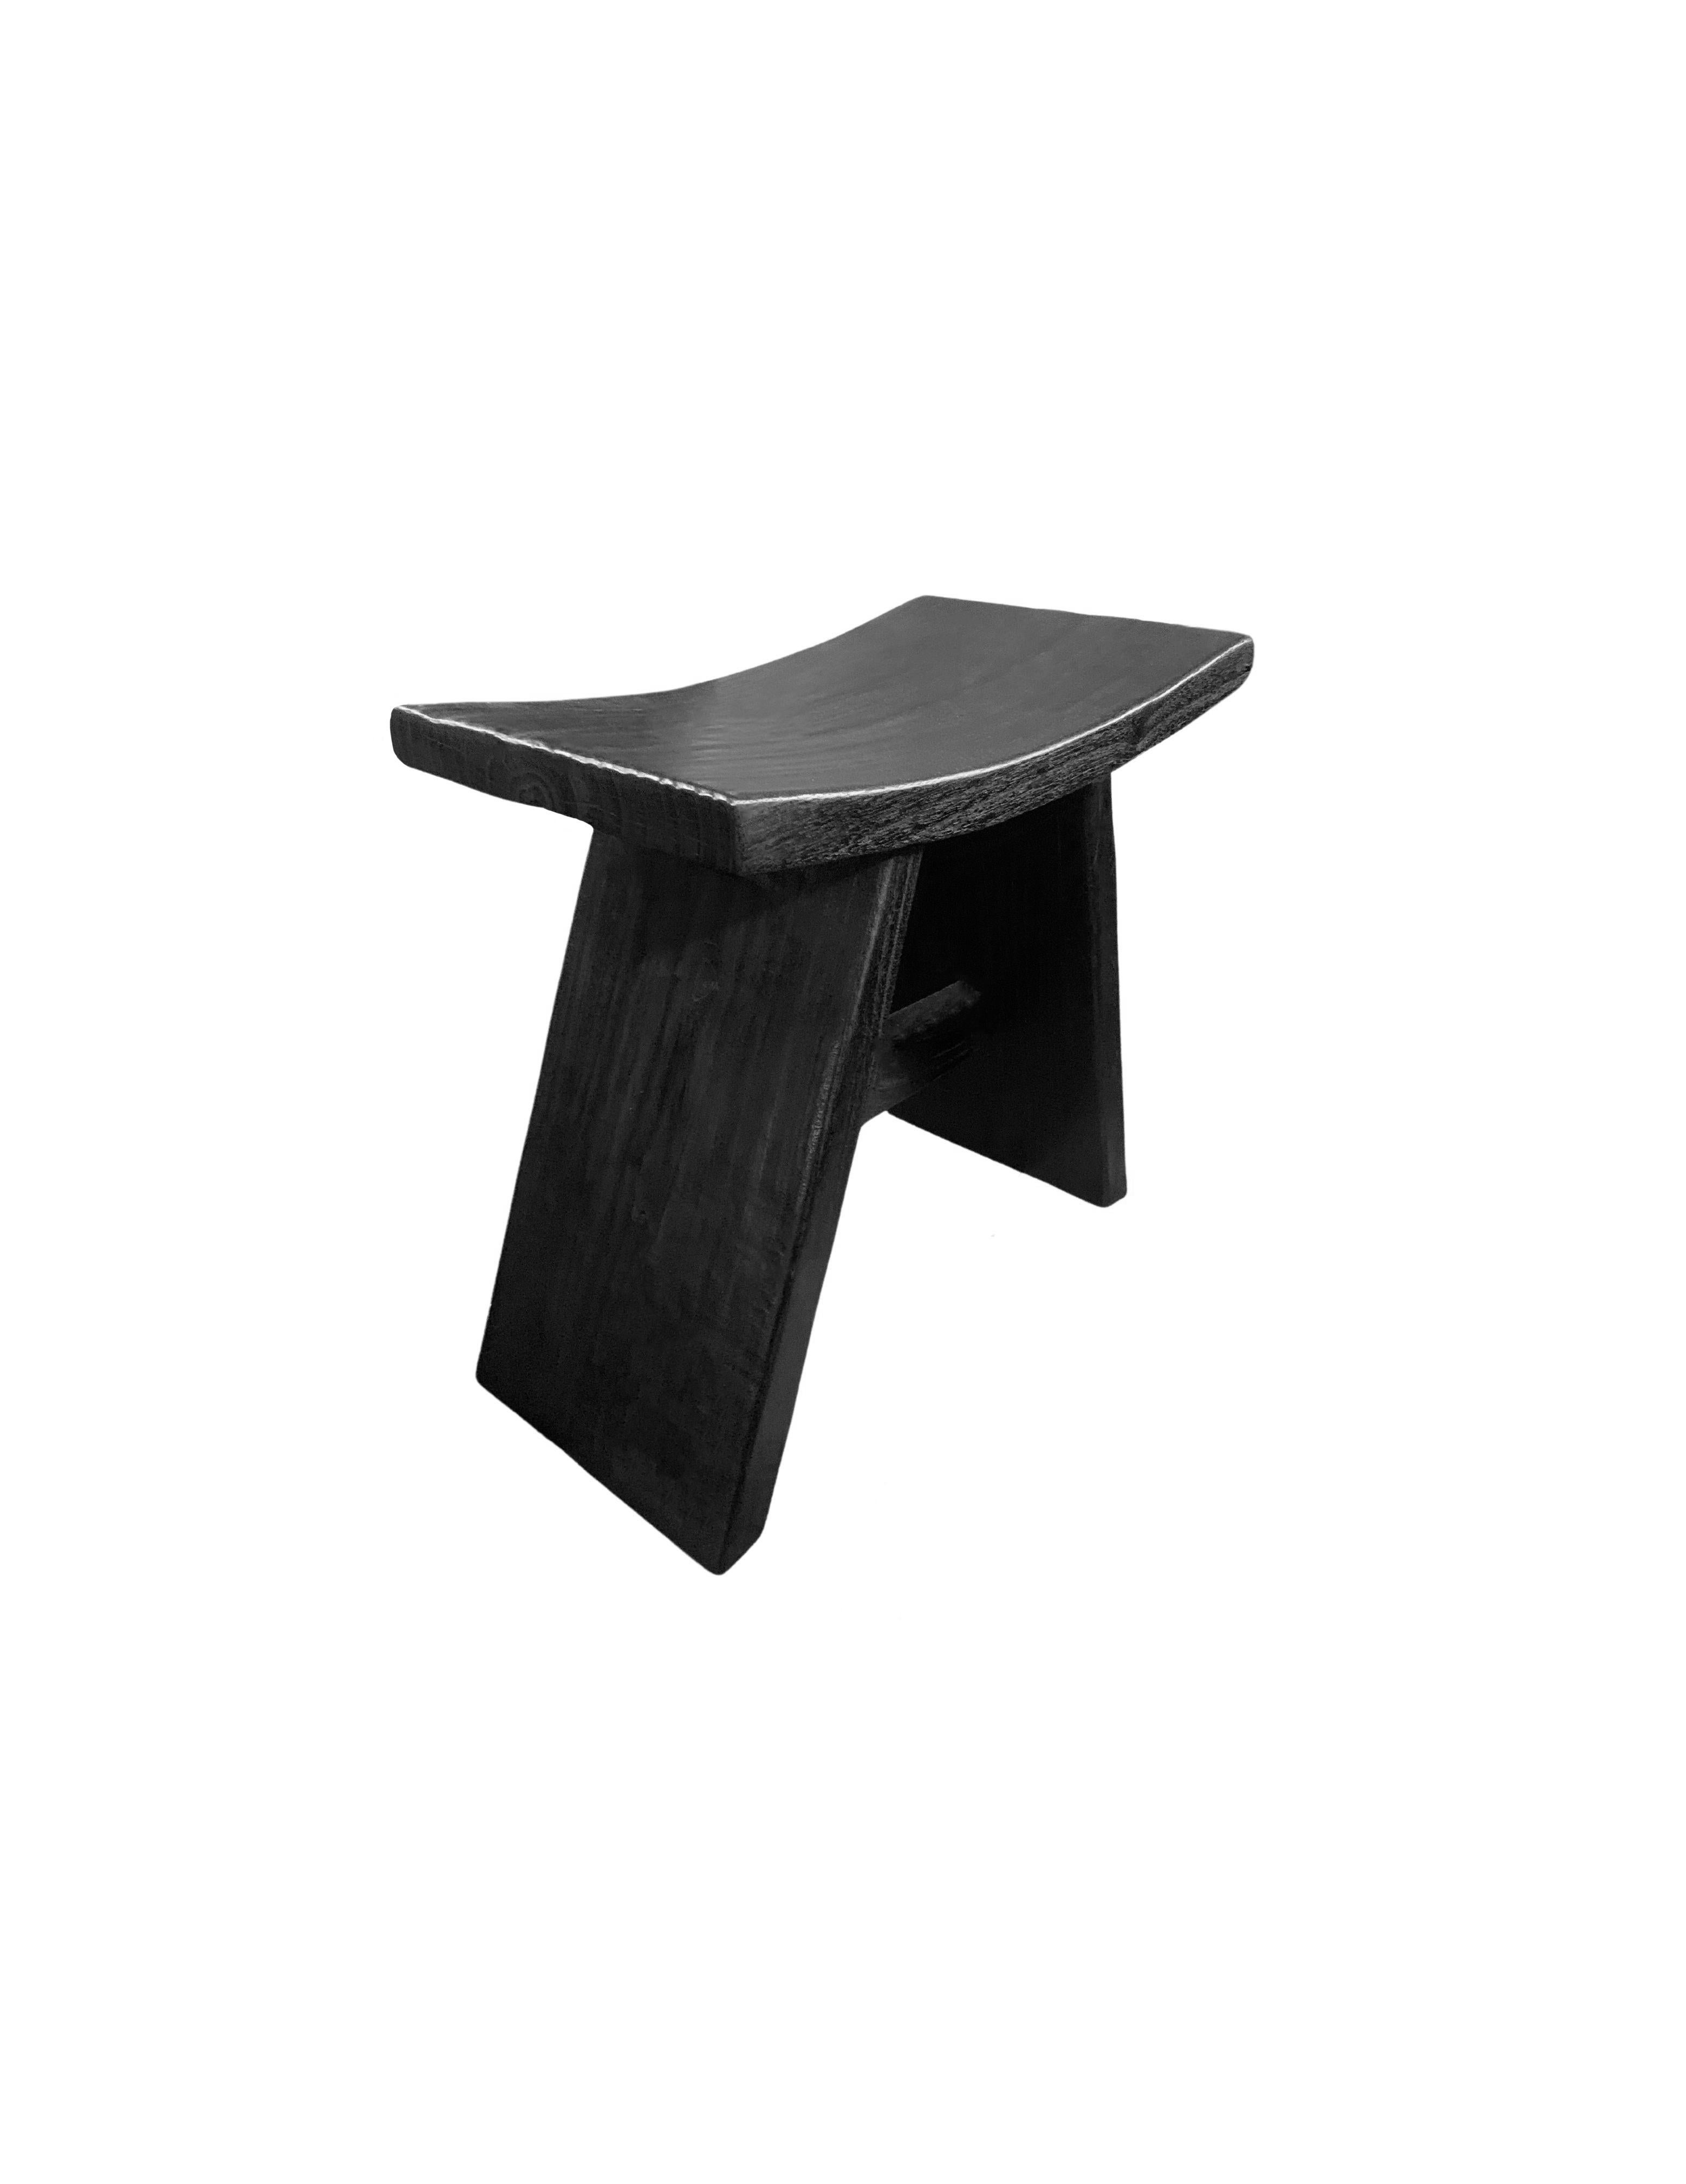 A wonderfully sculptural mango wood stool with angular legs and a curved seat. To achieve its rich black pigment the wood was burnt multiple times and then finished with a clear coat. Its neutral color and minimalist shape make it suitable for any